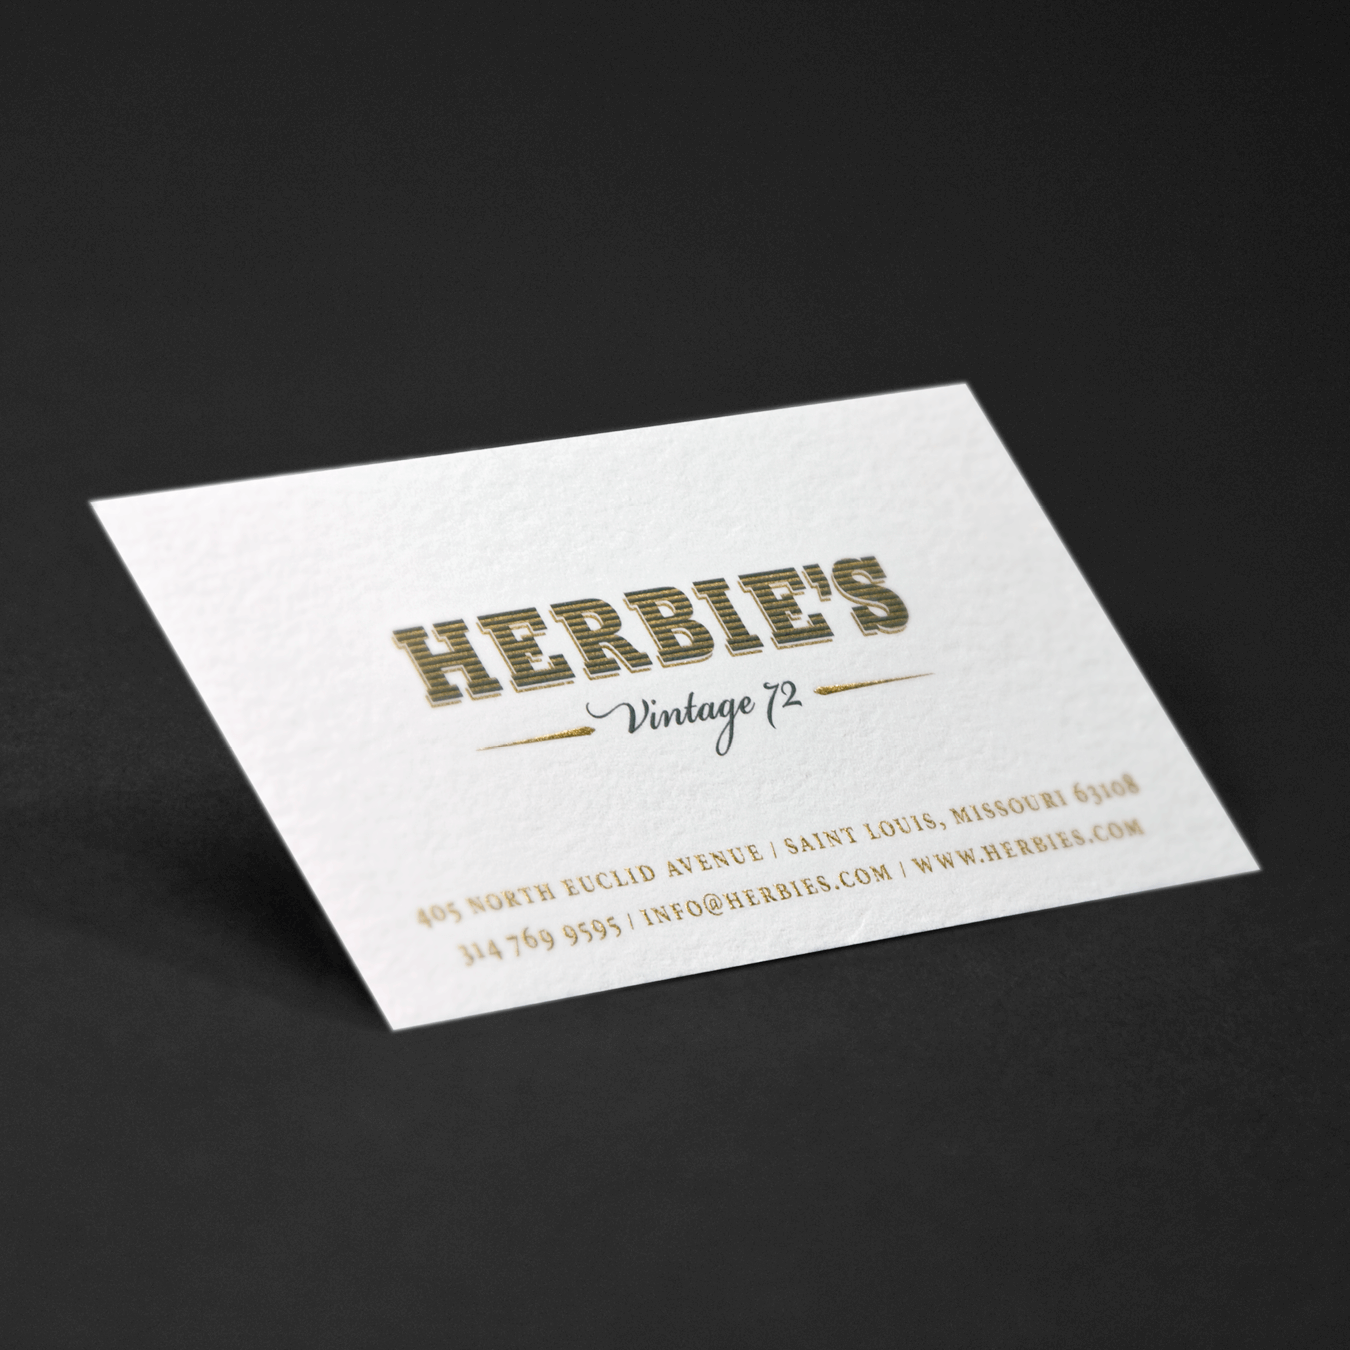 Branded business card for restaurant; Herbie's French American Bistro.